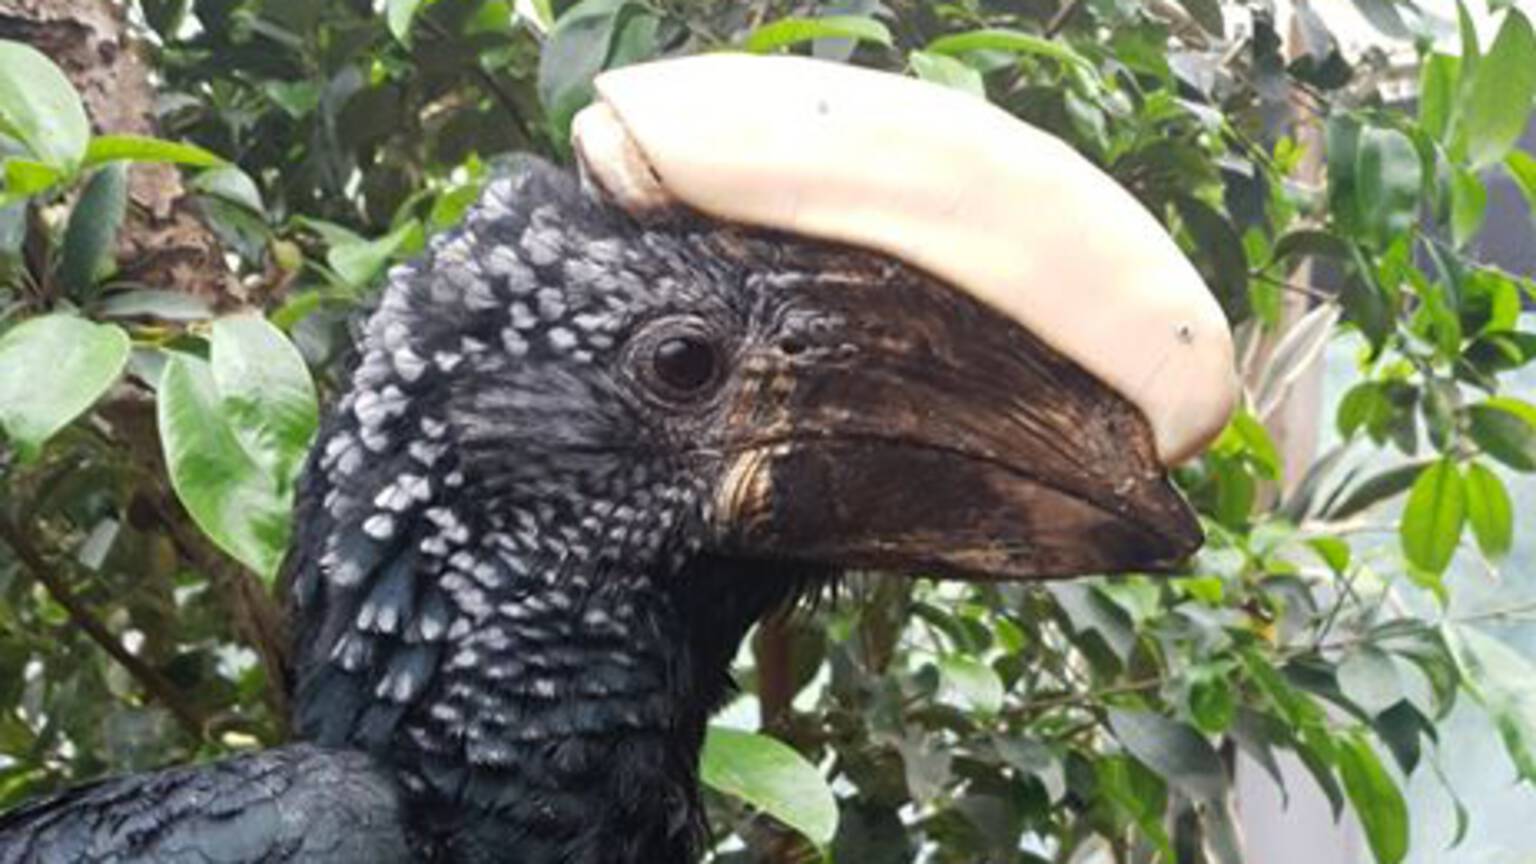 Silvery-cheeked hornbill Balou with its new horn, photo by Texel zoo